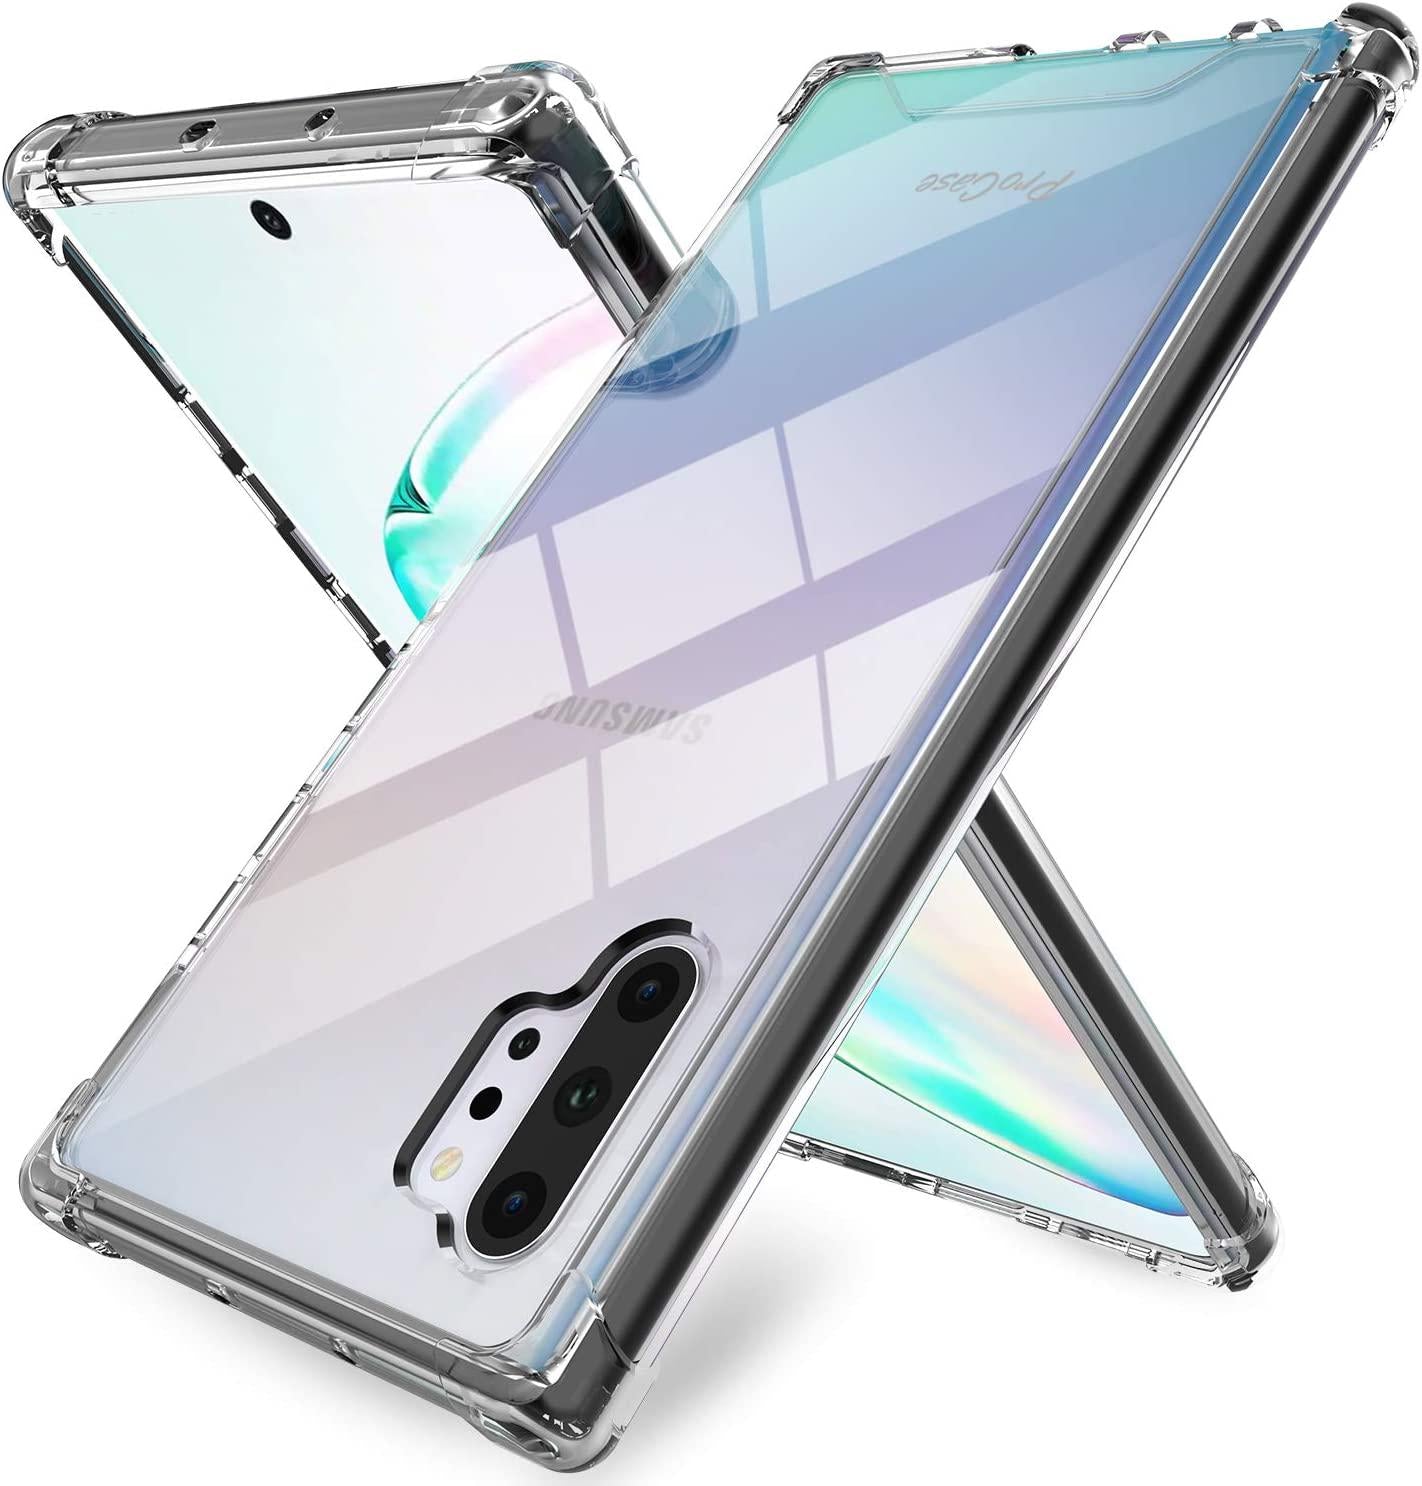 Procase, ProCase Galaxy Note 10+ Plus/5G Case Clear, Slim Hybrid Crystal Clear TPU Cover with Reinforced Corners, Transparent Anti-Scratch Rugged Protective Case for Galaxy Note 10+ / 10 Plus / 5G 2019-Black Frame